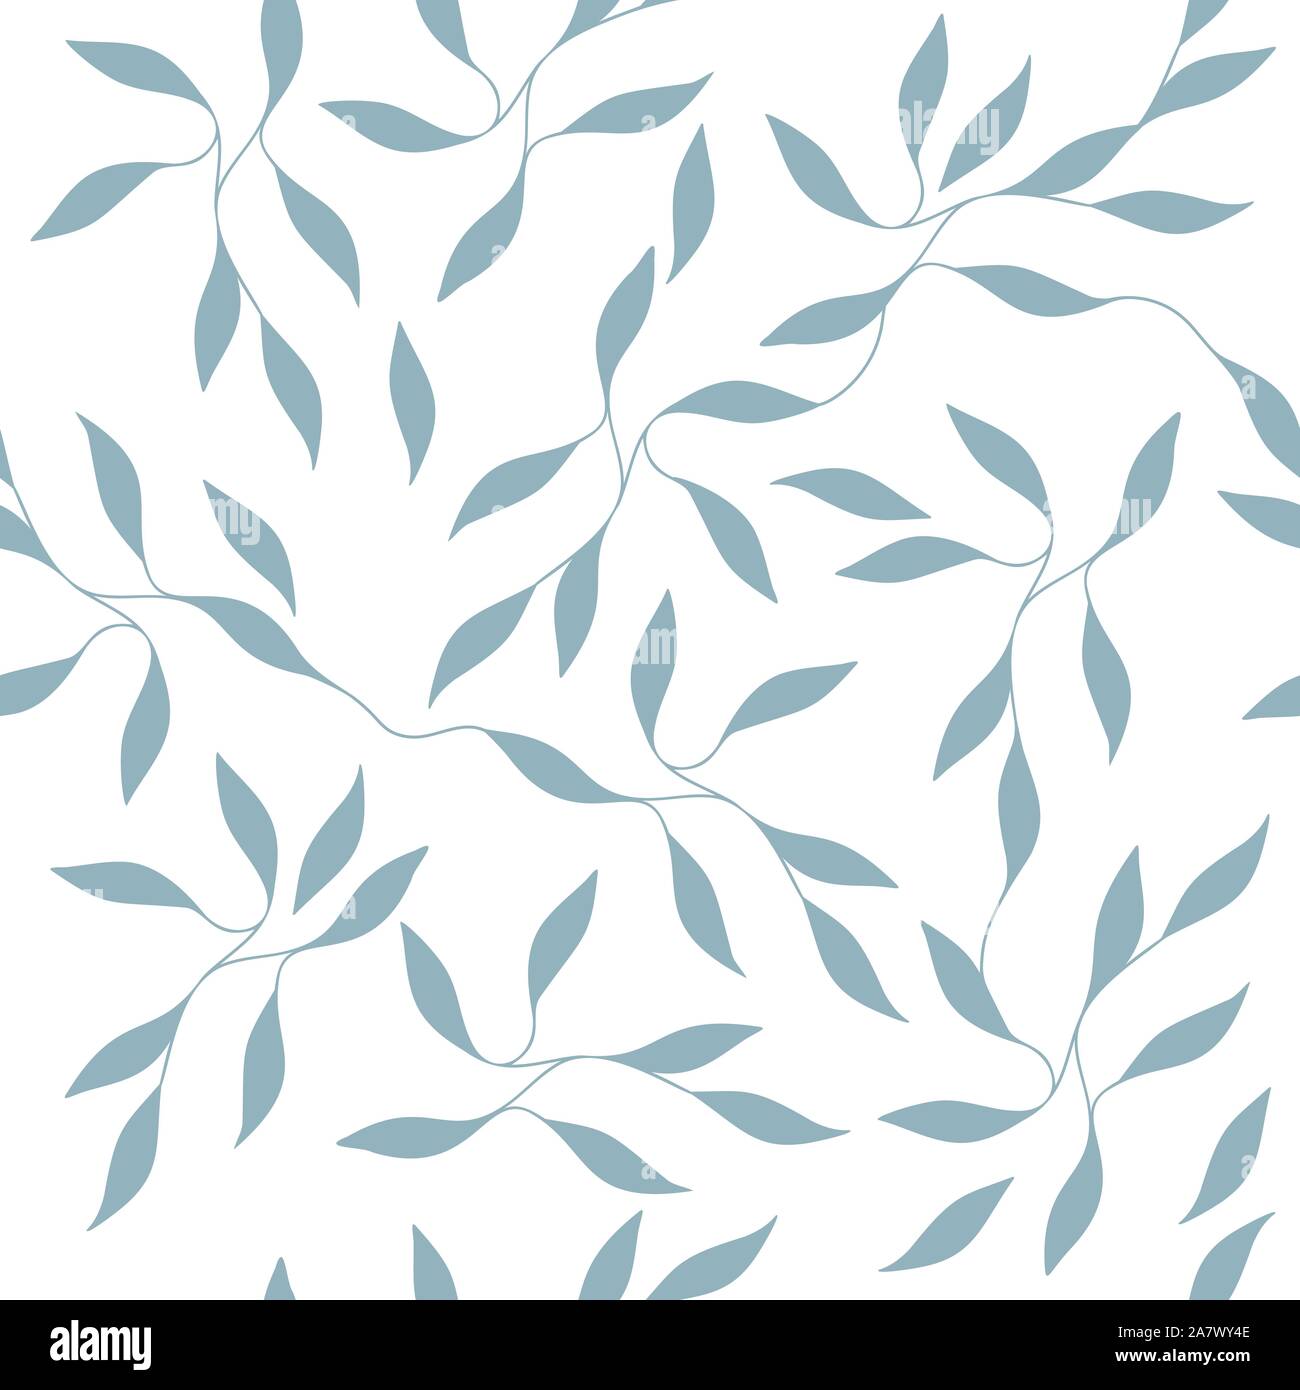 Ornate Small Leaves on Branches Seamless Repeating Pattern Vector Illustration Stock Vector